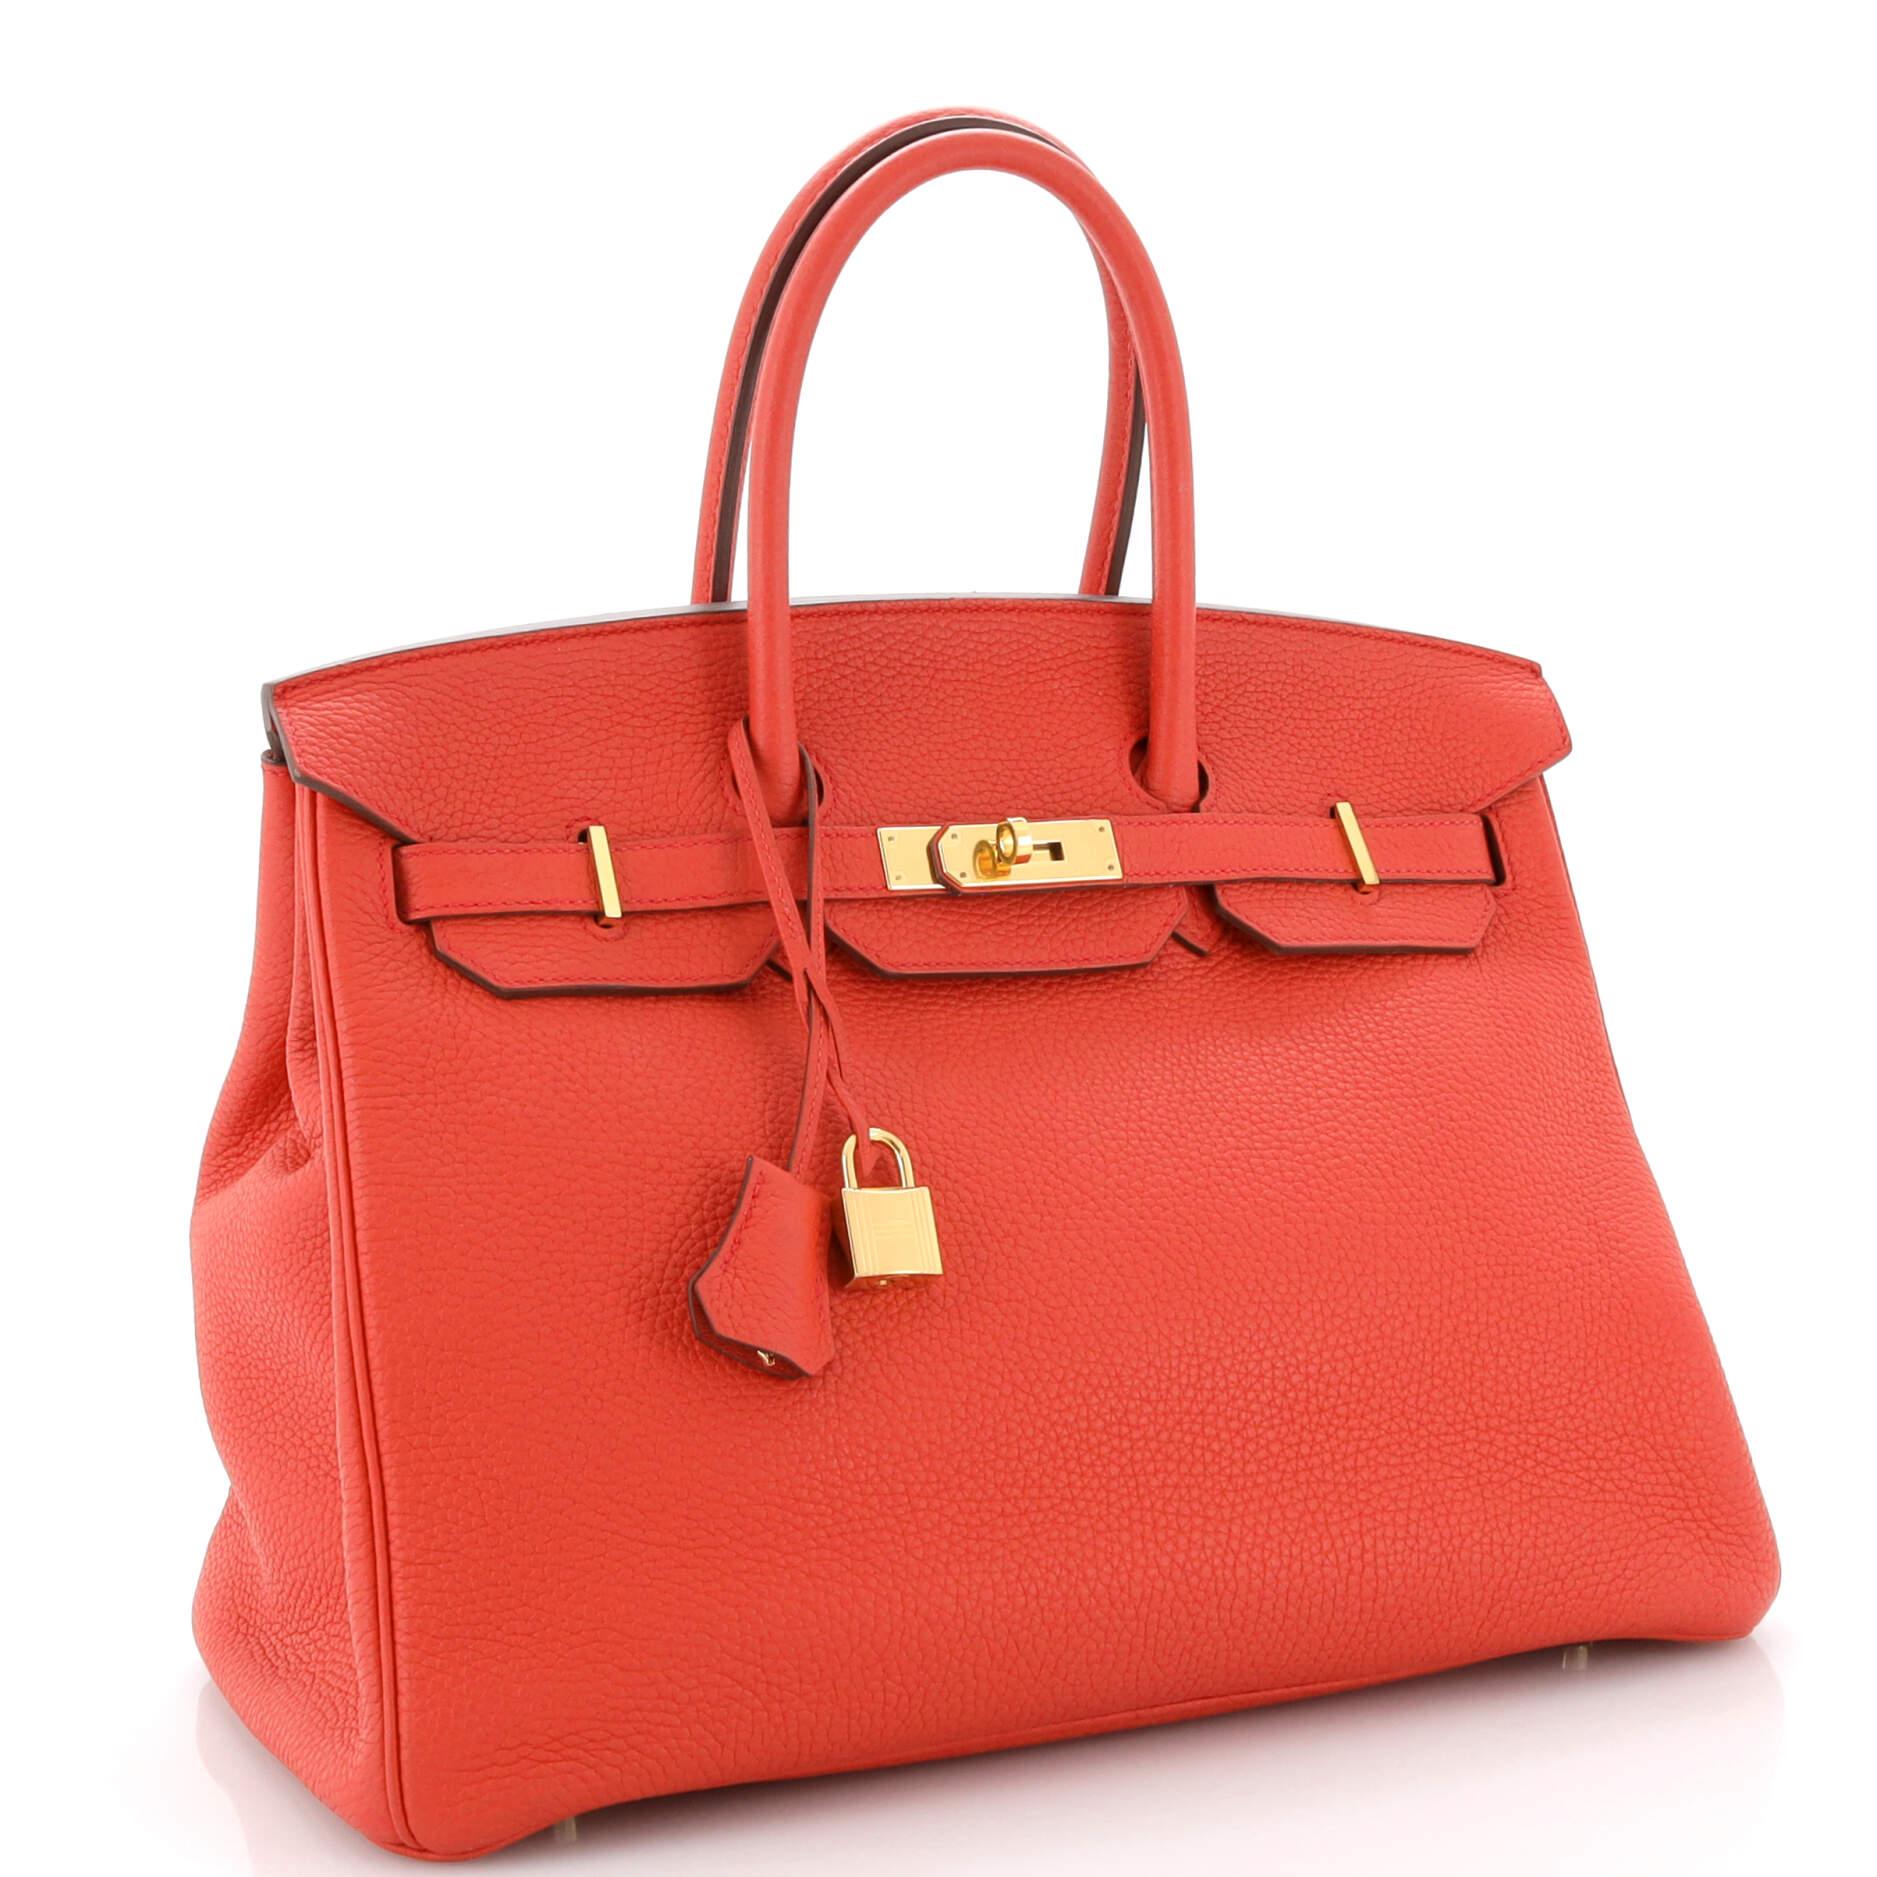 Hermes Birkin Handbag Géranuim Clemence with Gold Hardware 35 In Good Condition For Sale In NY, NY